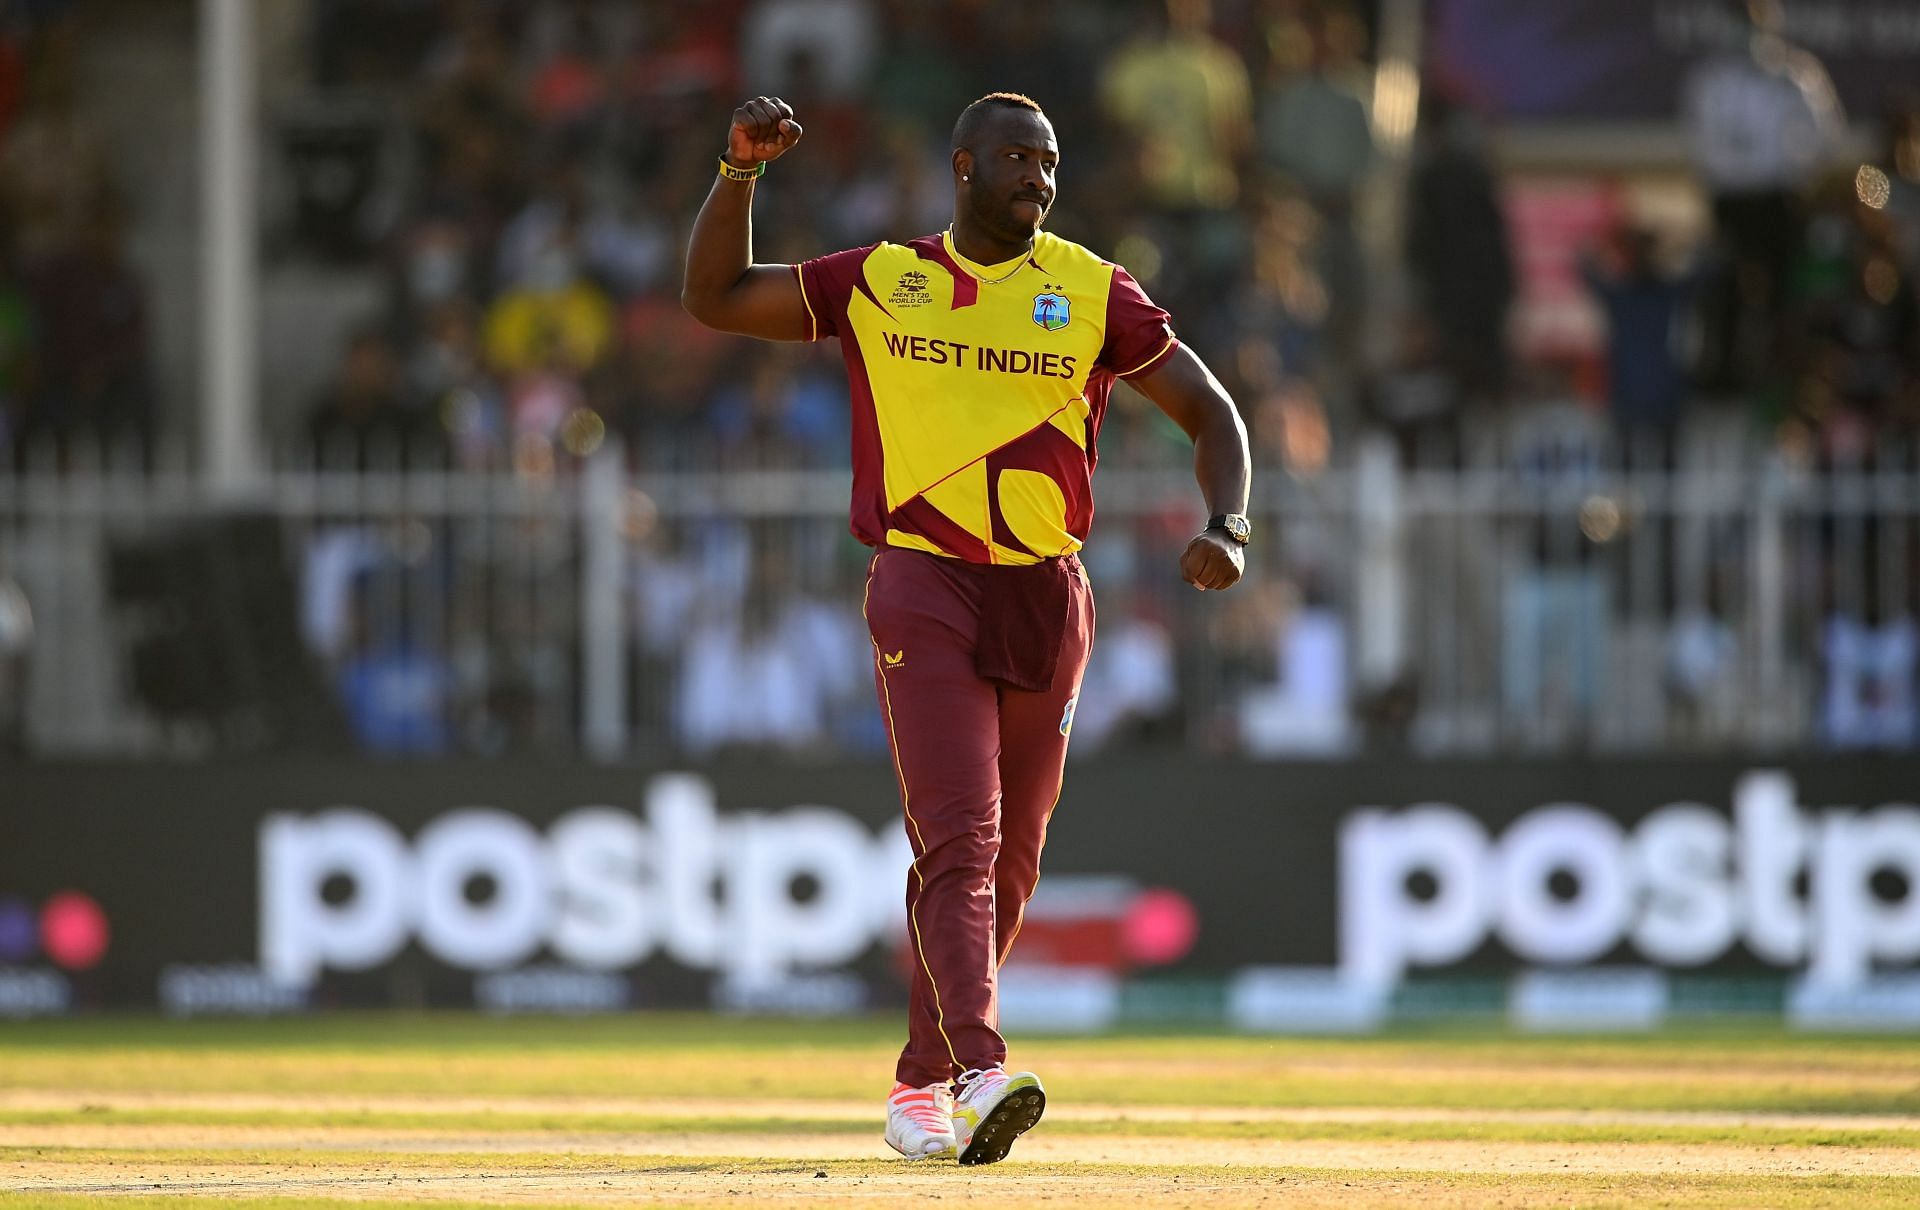 Andre Russell is a terrific all-rounder who is unstoppable when in form